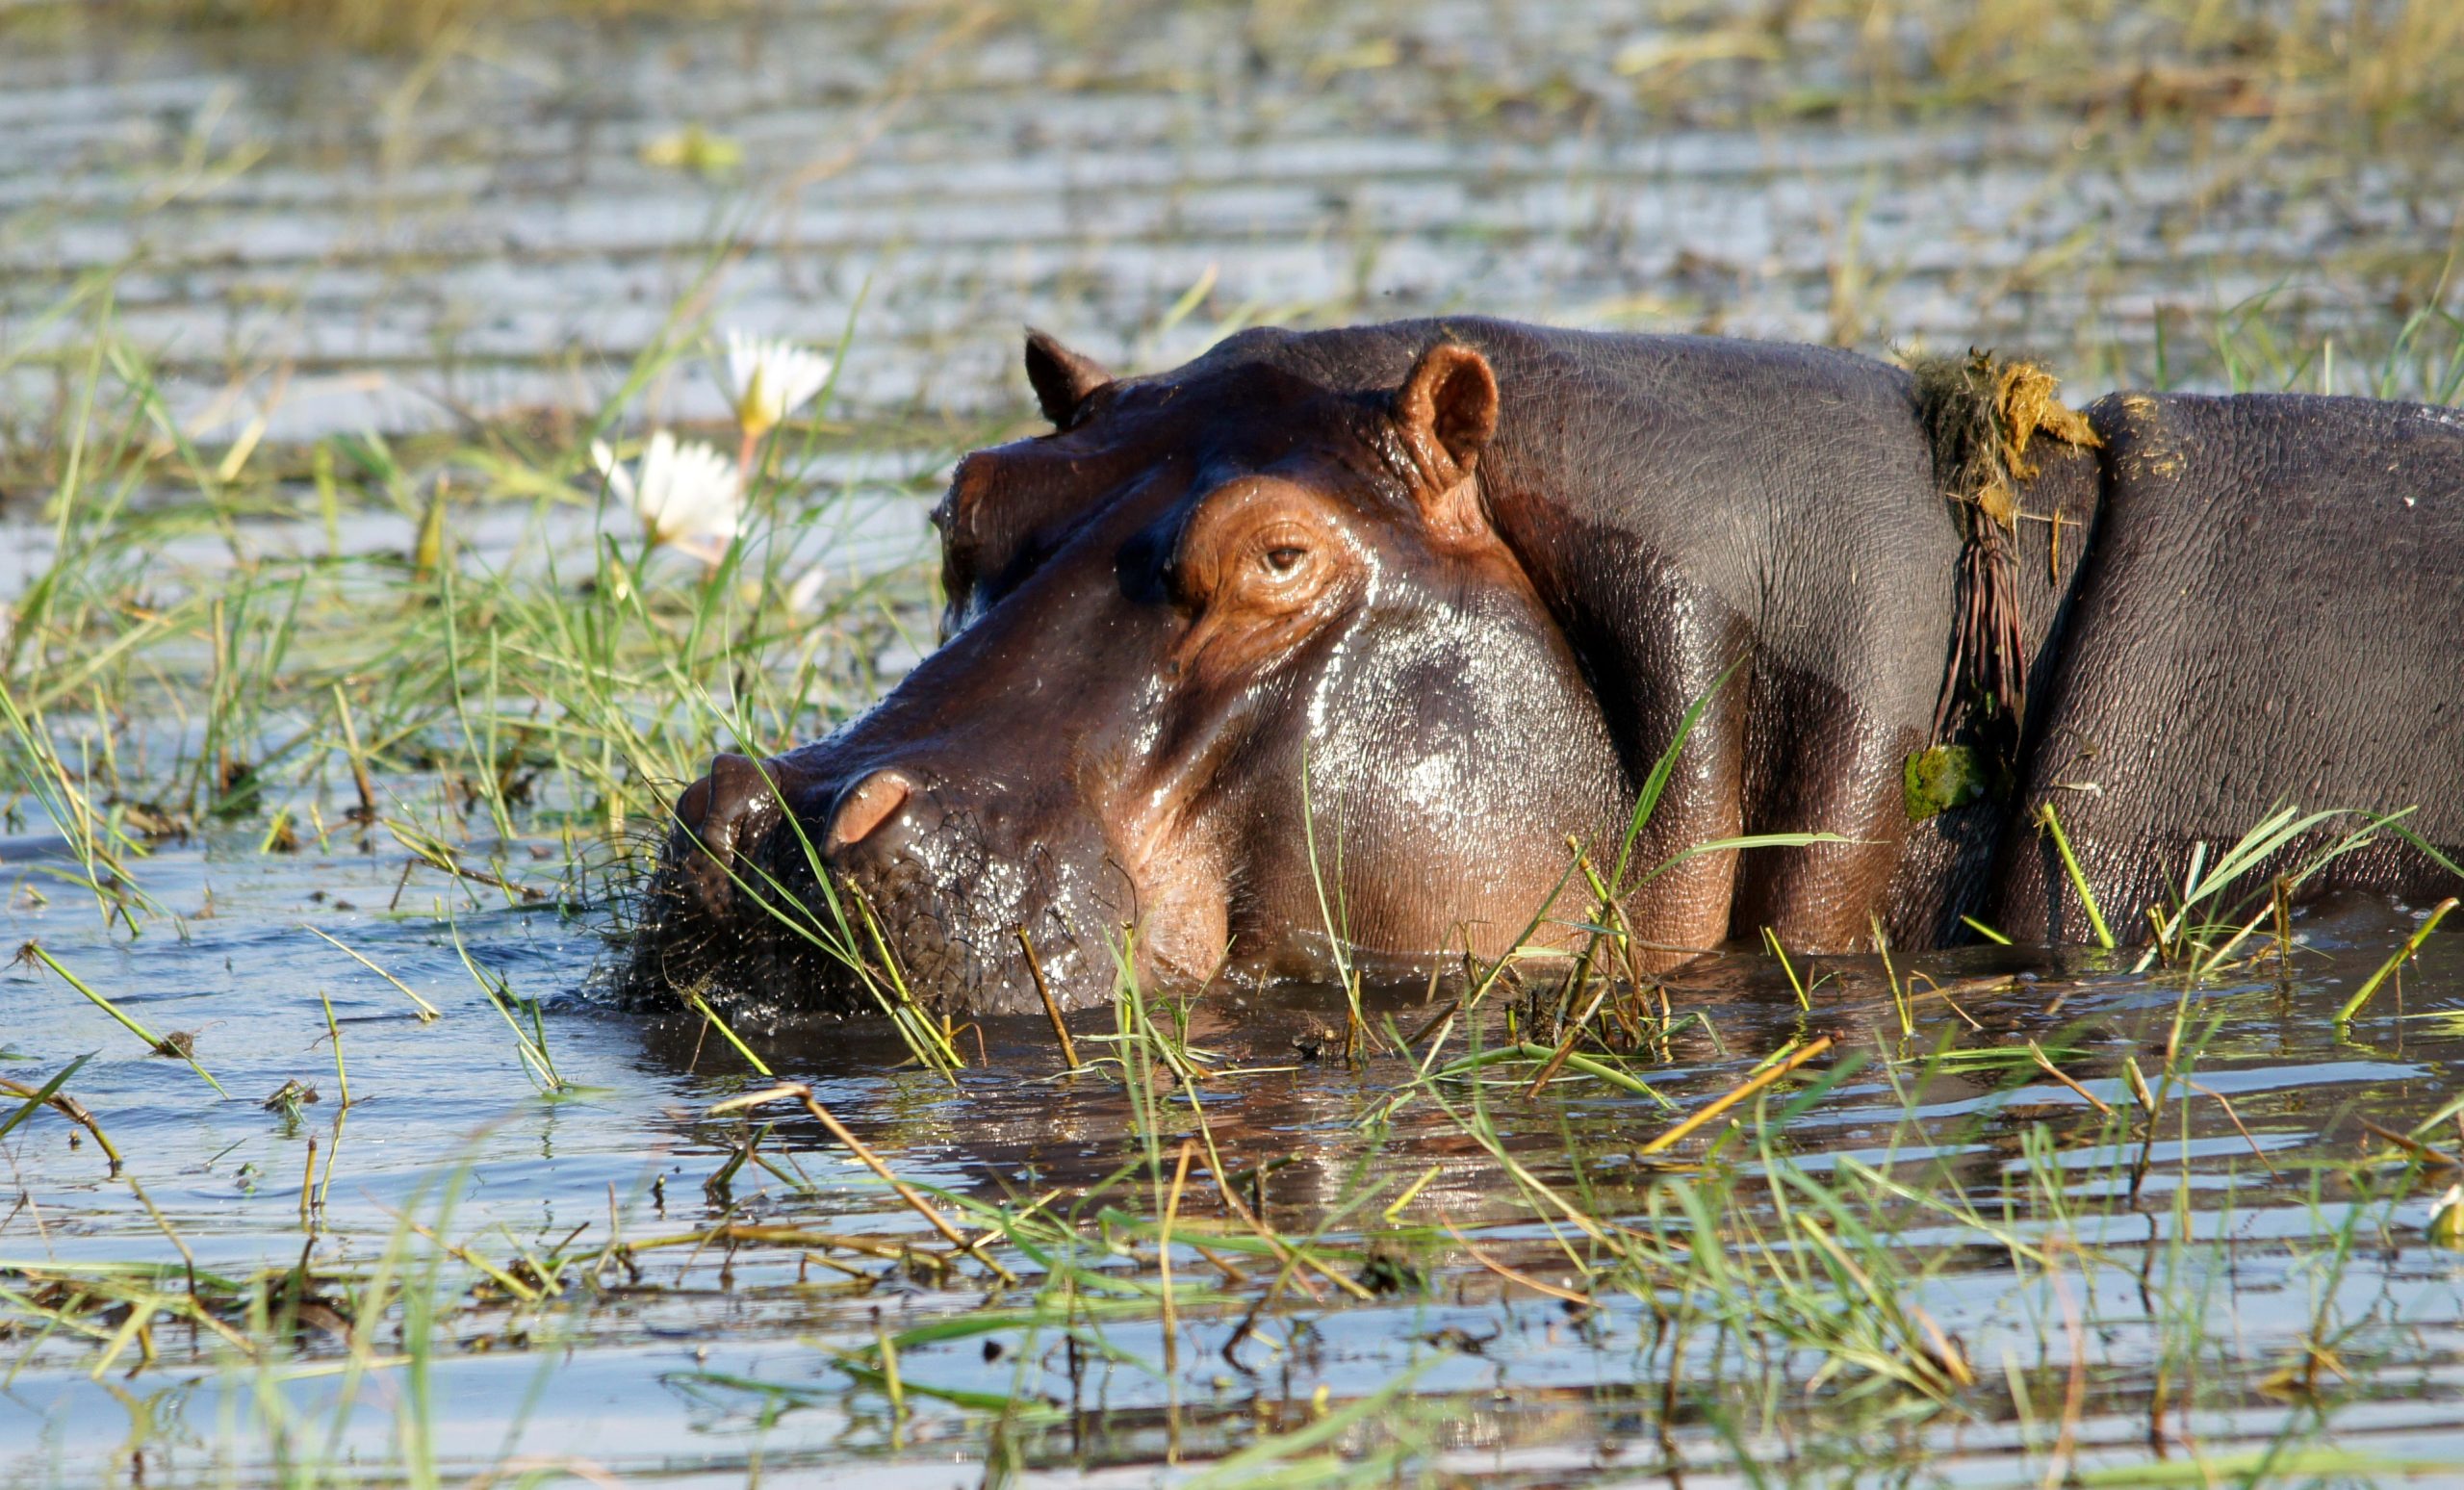 A hippo partially submerged in water